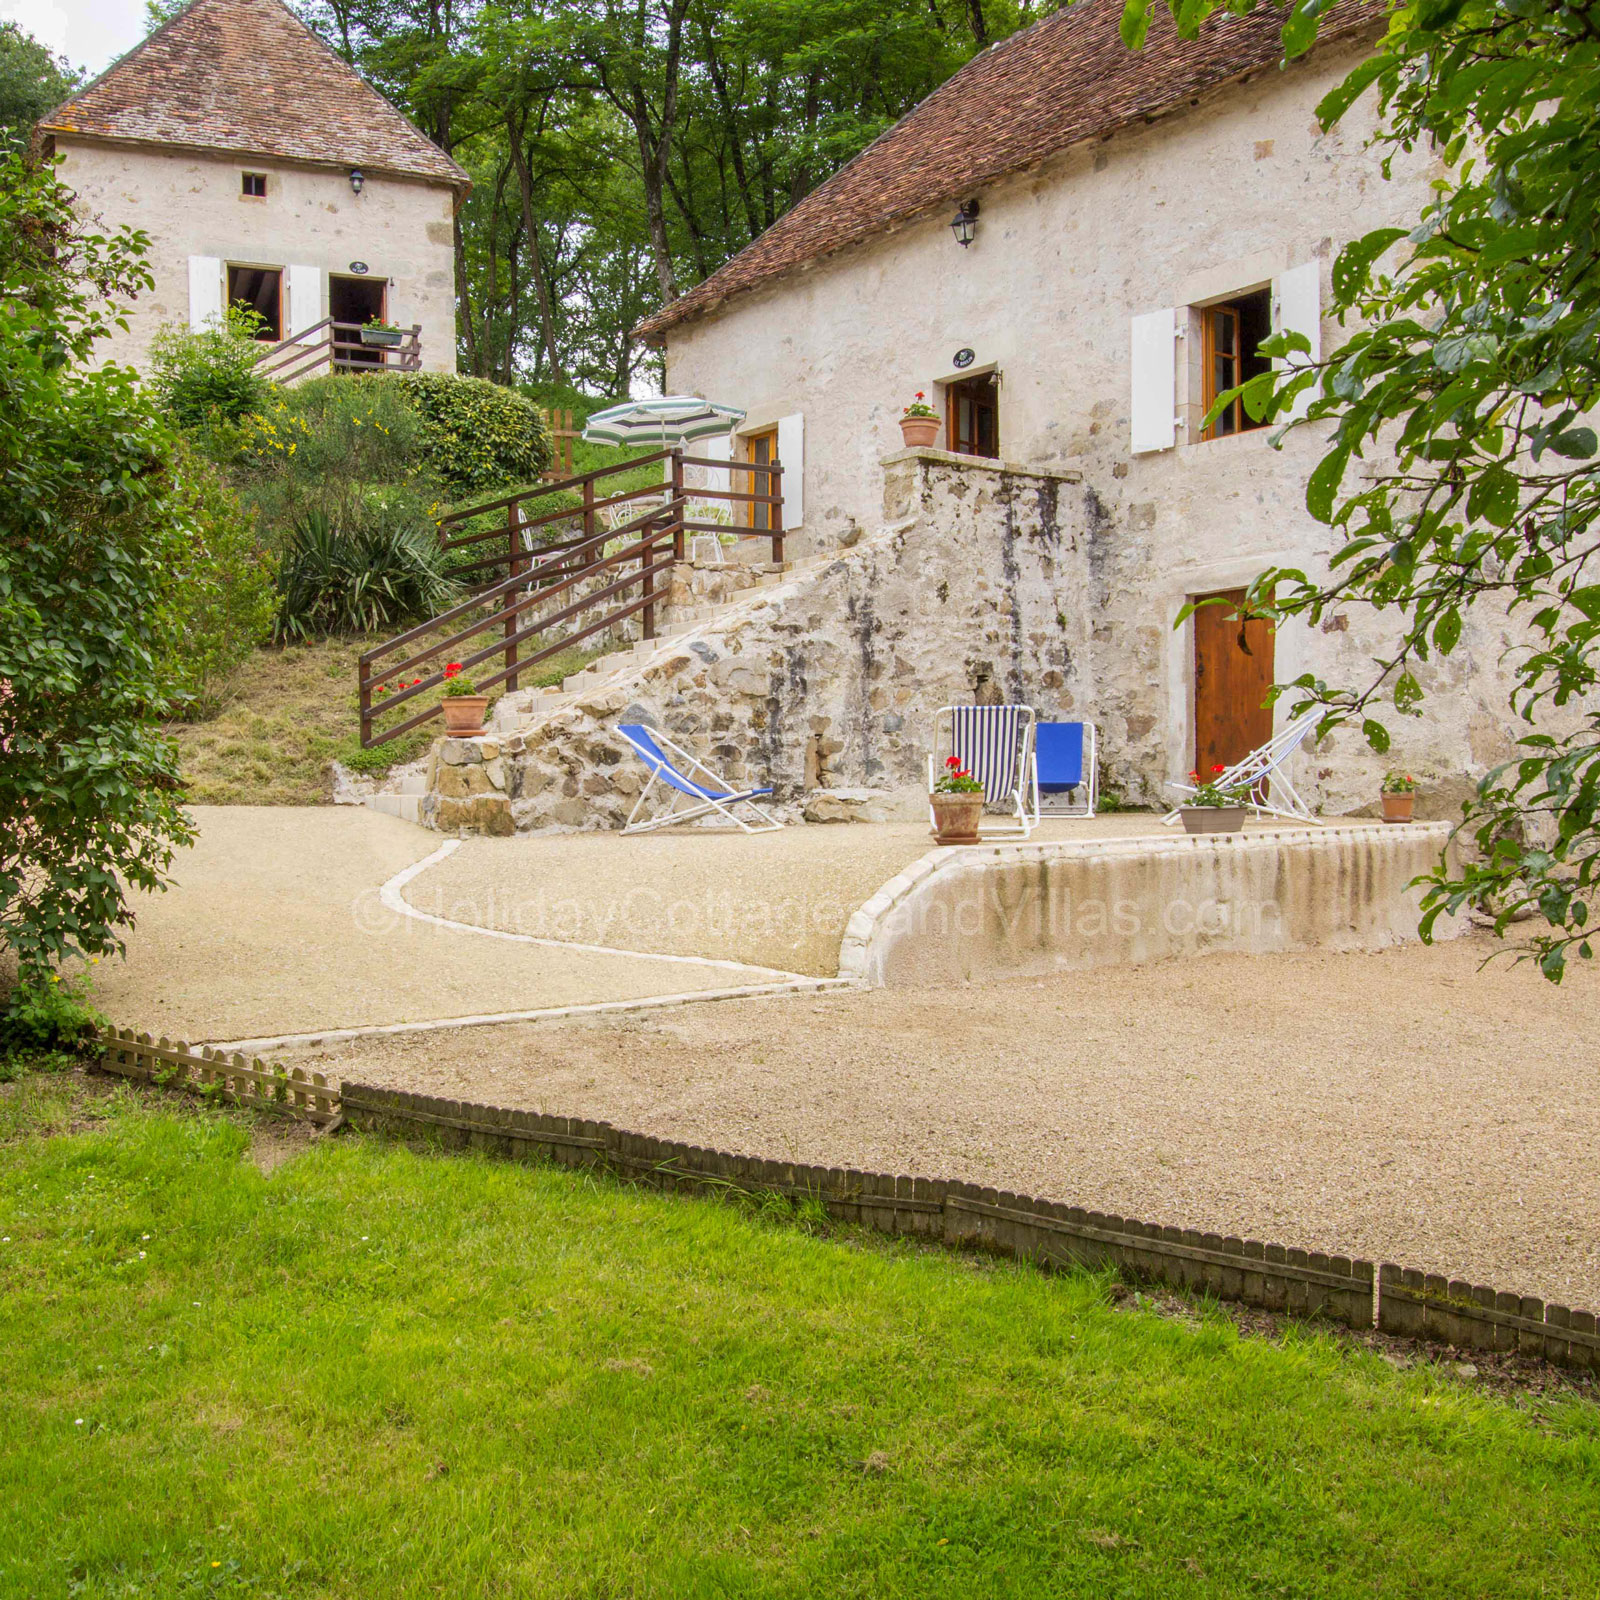 Holiday cottage in France with a pool and fishing next to a river